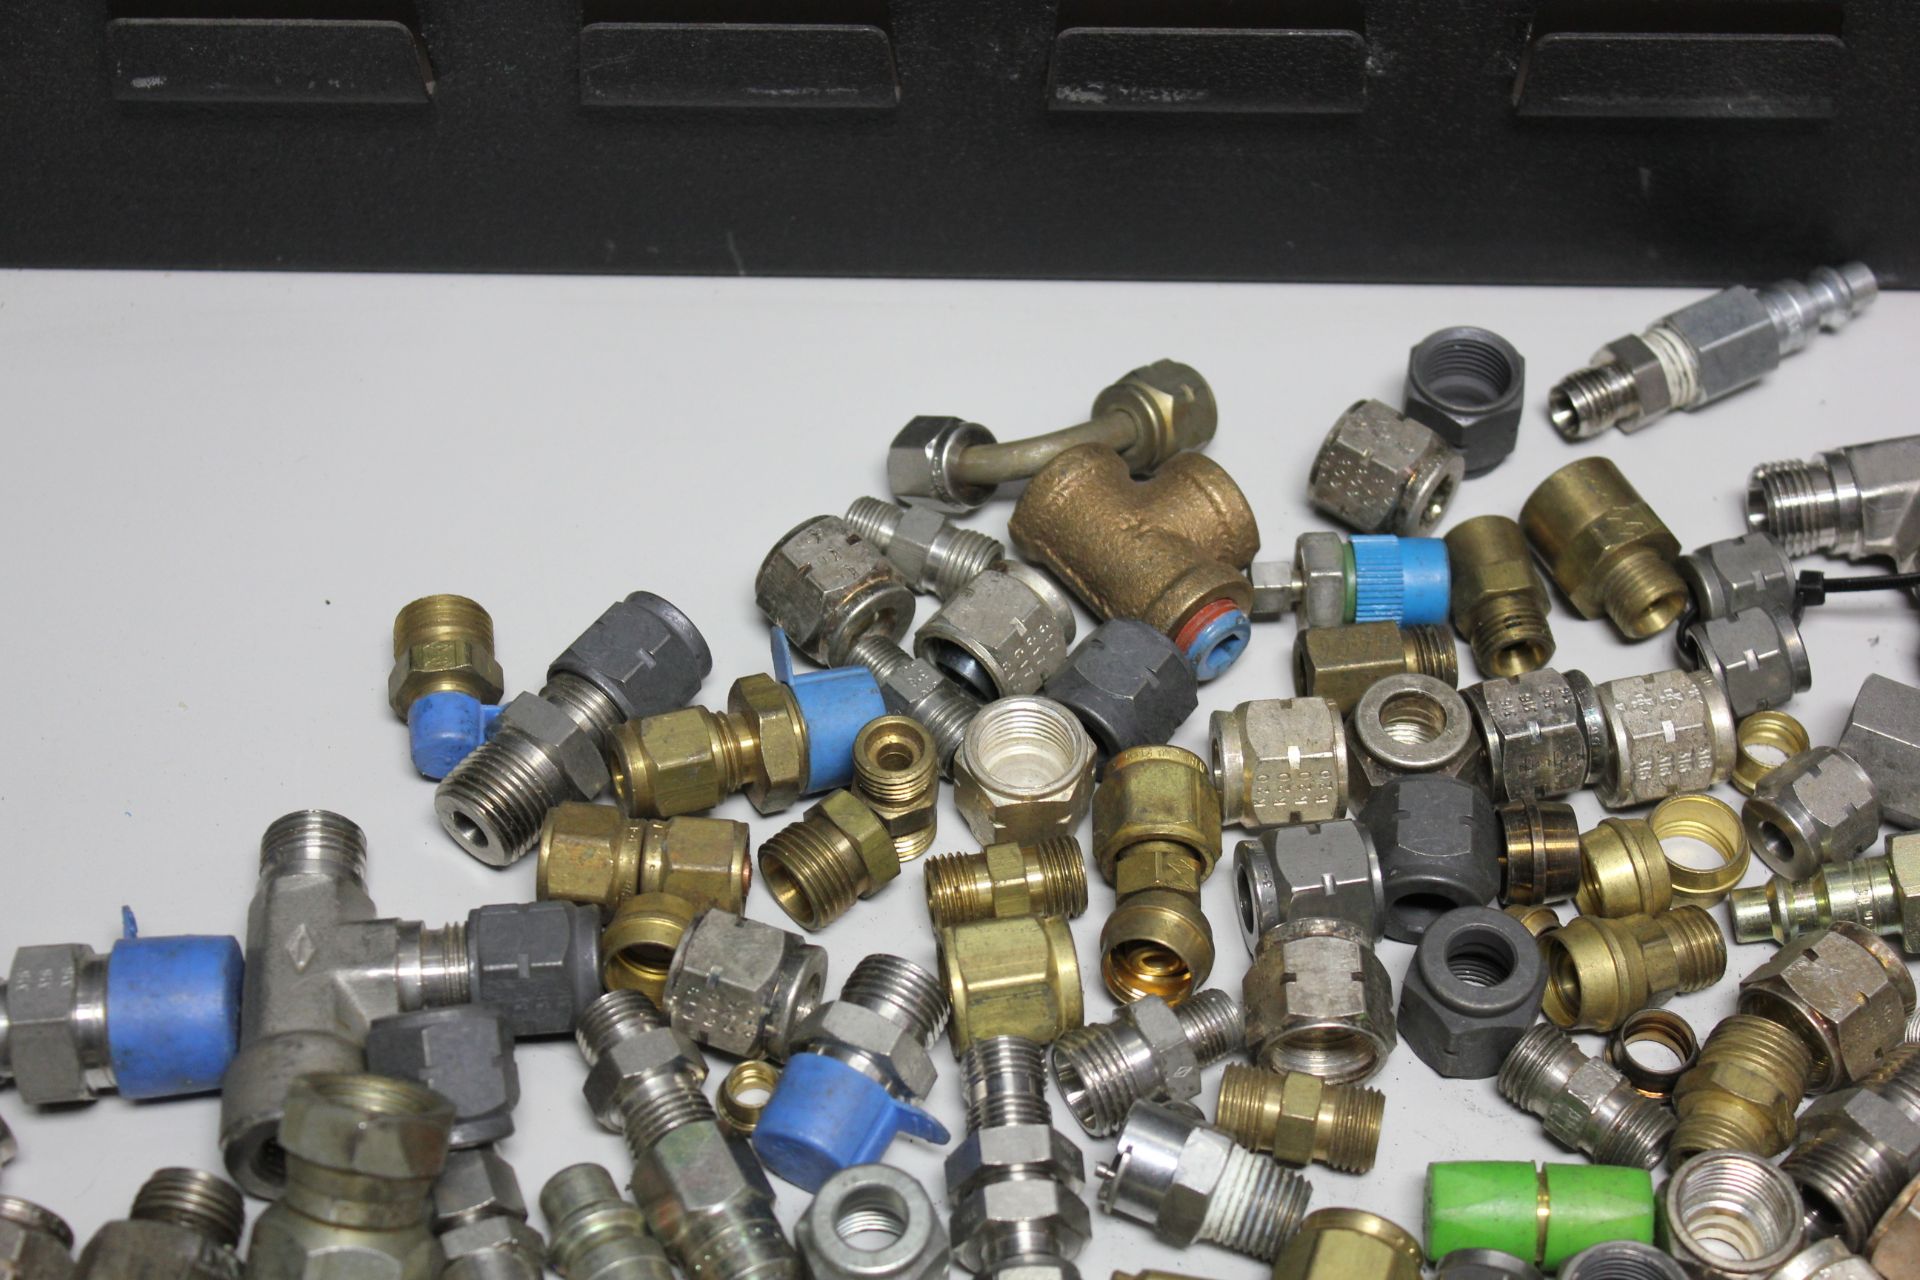 LOT OF COMPRESSION FITTINGS - SWAGELOK, CAJON, ETC - Image 2 of 8